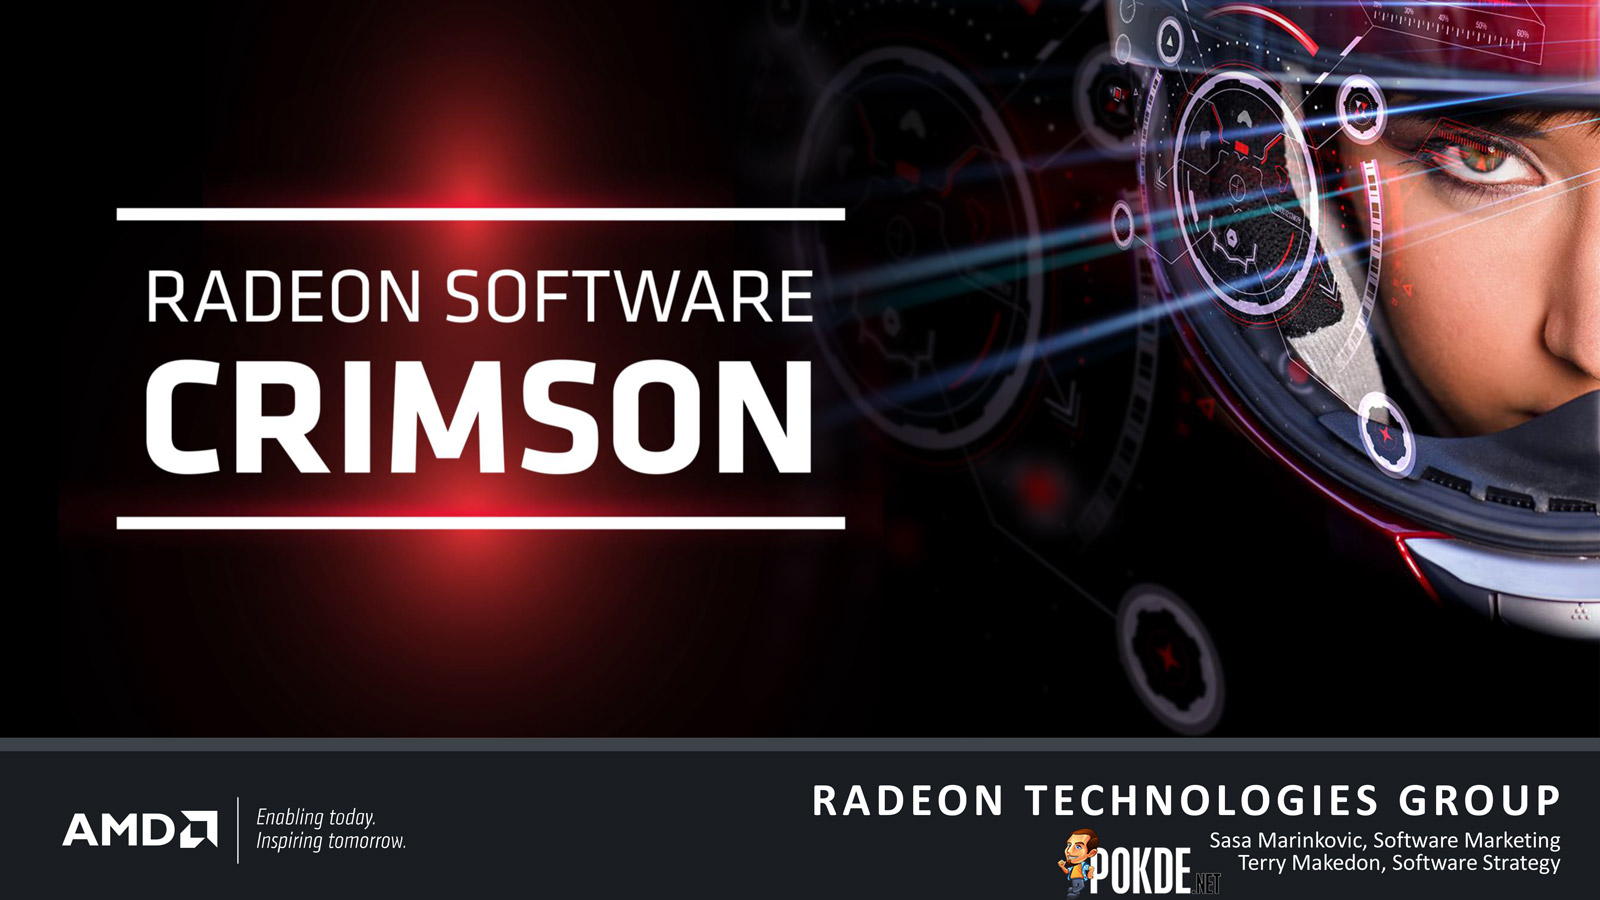 Radeon Technologies Group launched their first product today — Radeon Software Crimson Edition 24